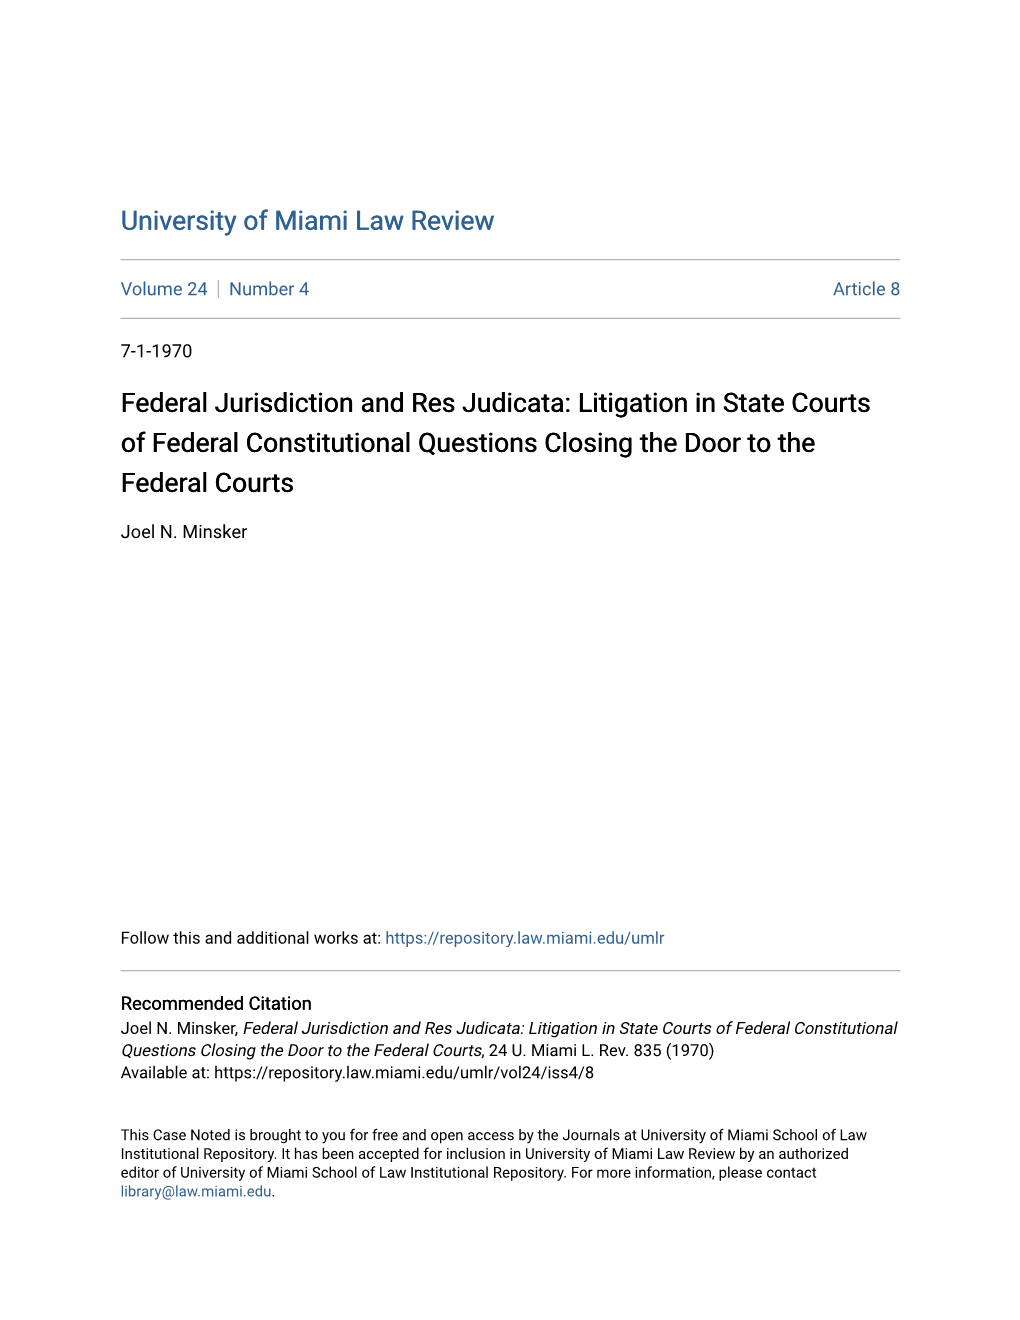 Federal Jurisdiction and Res Judicata: Litigation in State Courts of Federal Constitutional Questions Closing the Door to the Federal Courts